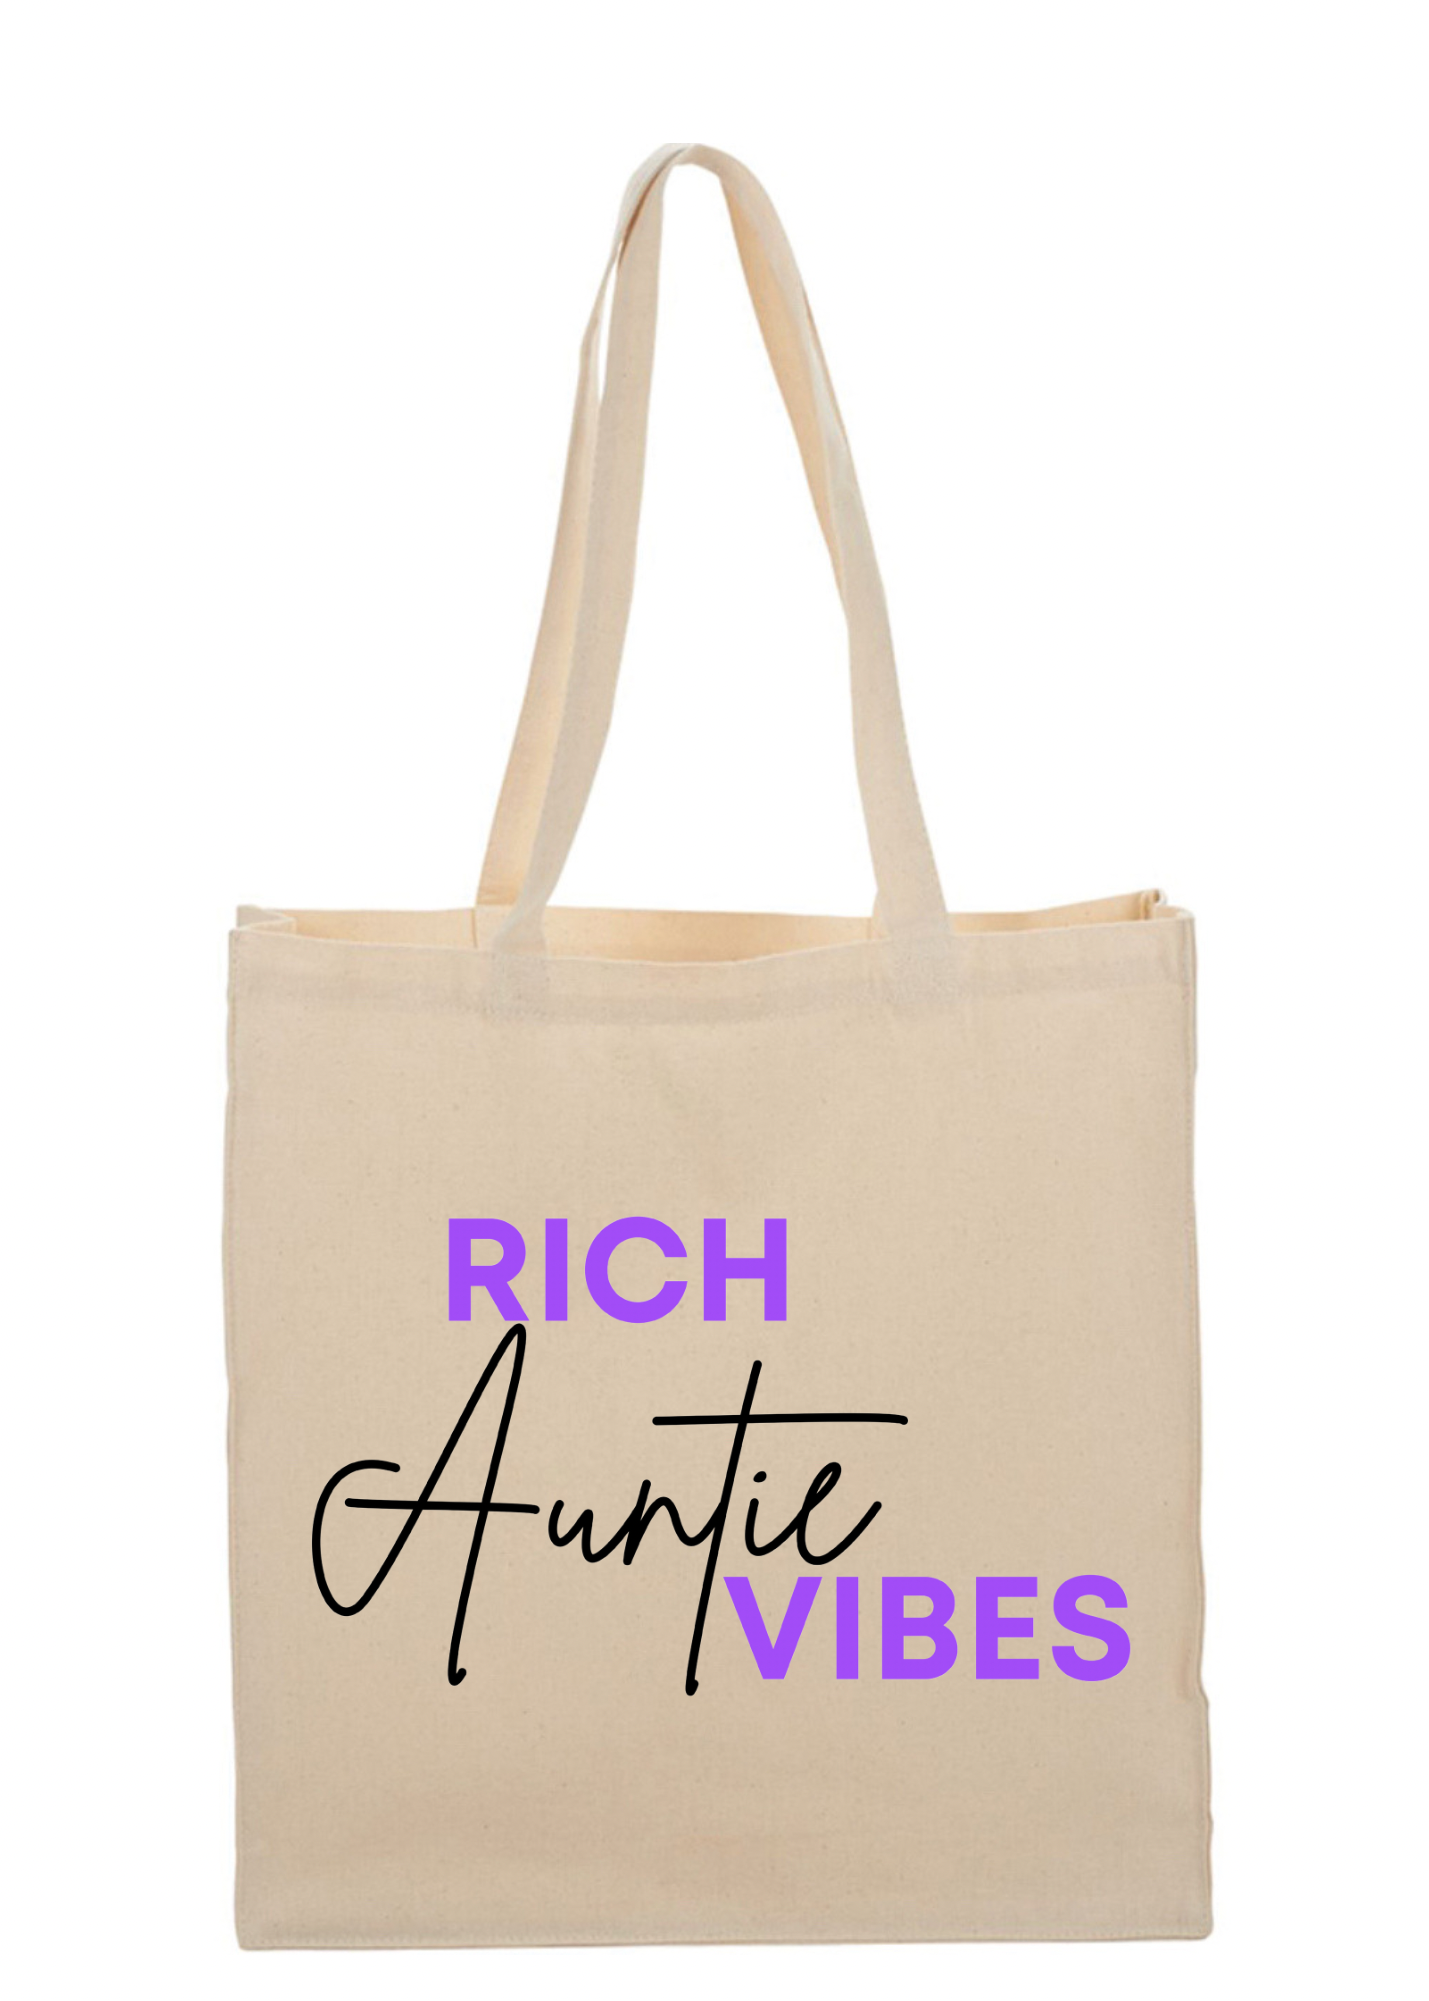 RAV Tote Bags - 2 colors available